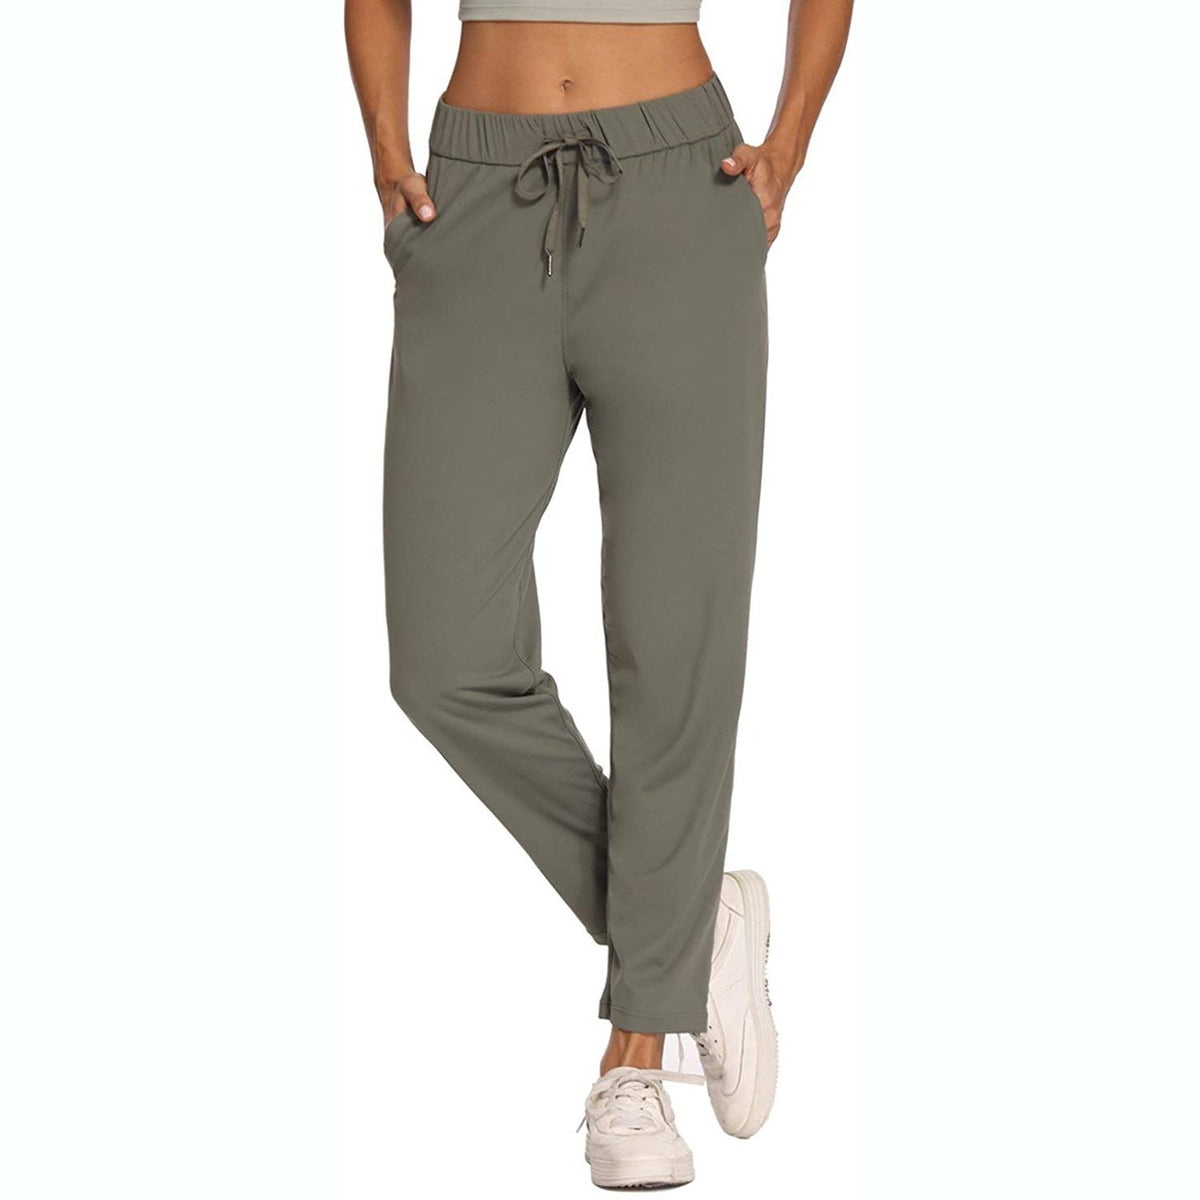 MYTREKALLY Women's Golf Pants Workout Gym Pants Joggers Athletic